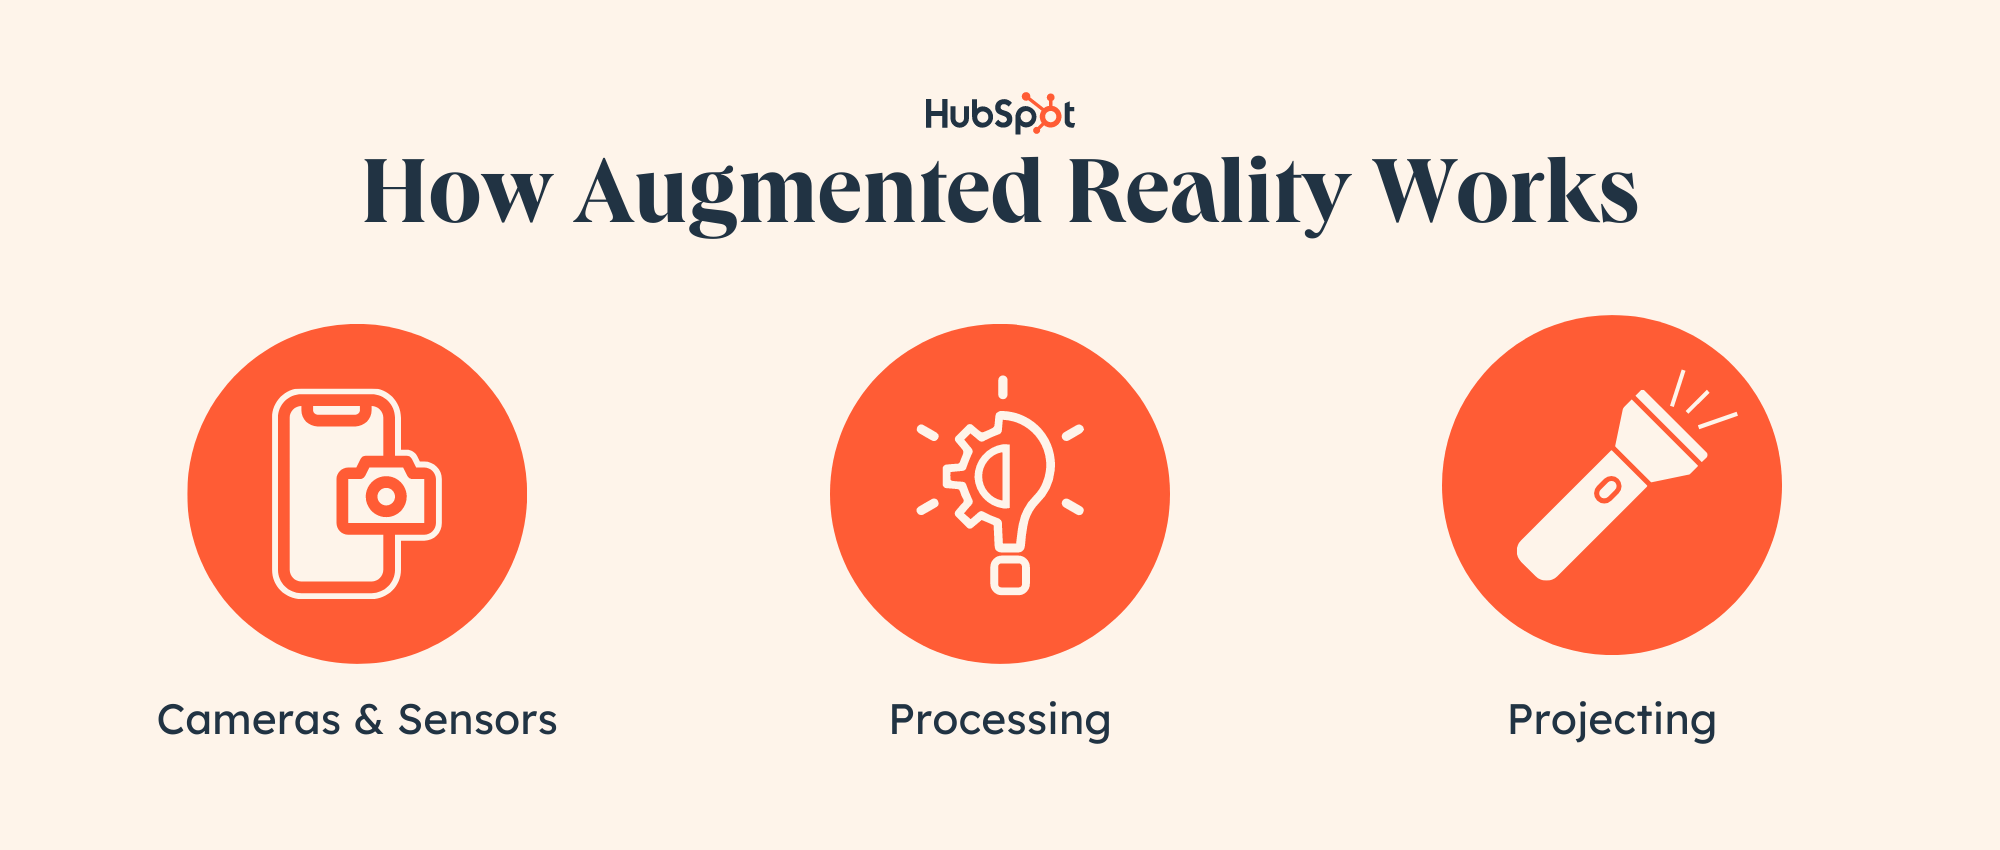 How%20Augmented%20Reality%20Works.png?width=2000&height=850&name=How%20Augmented%20Reality%20Works - The Ultimate Guide to Augmented Reality